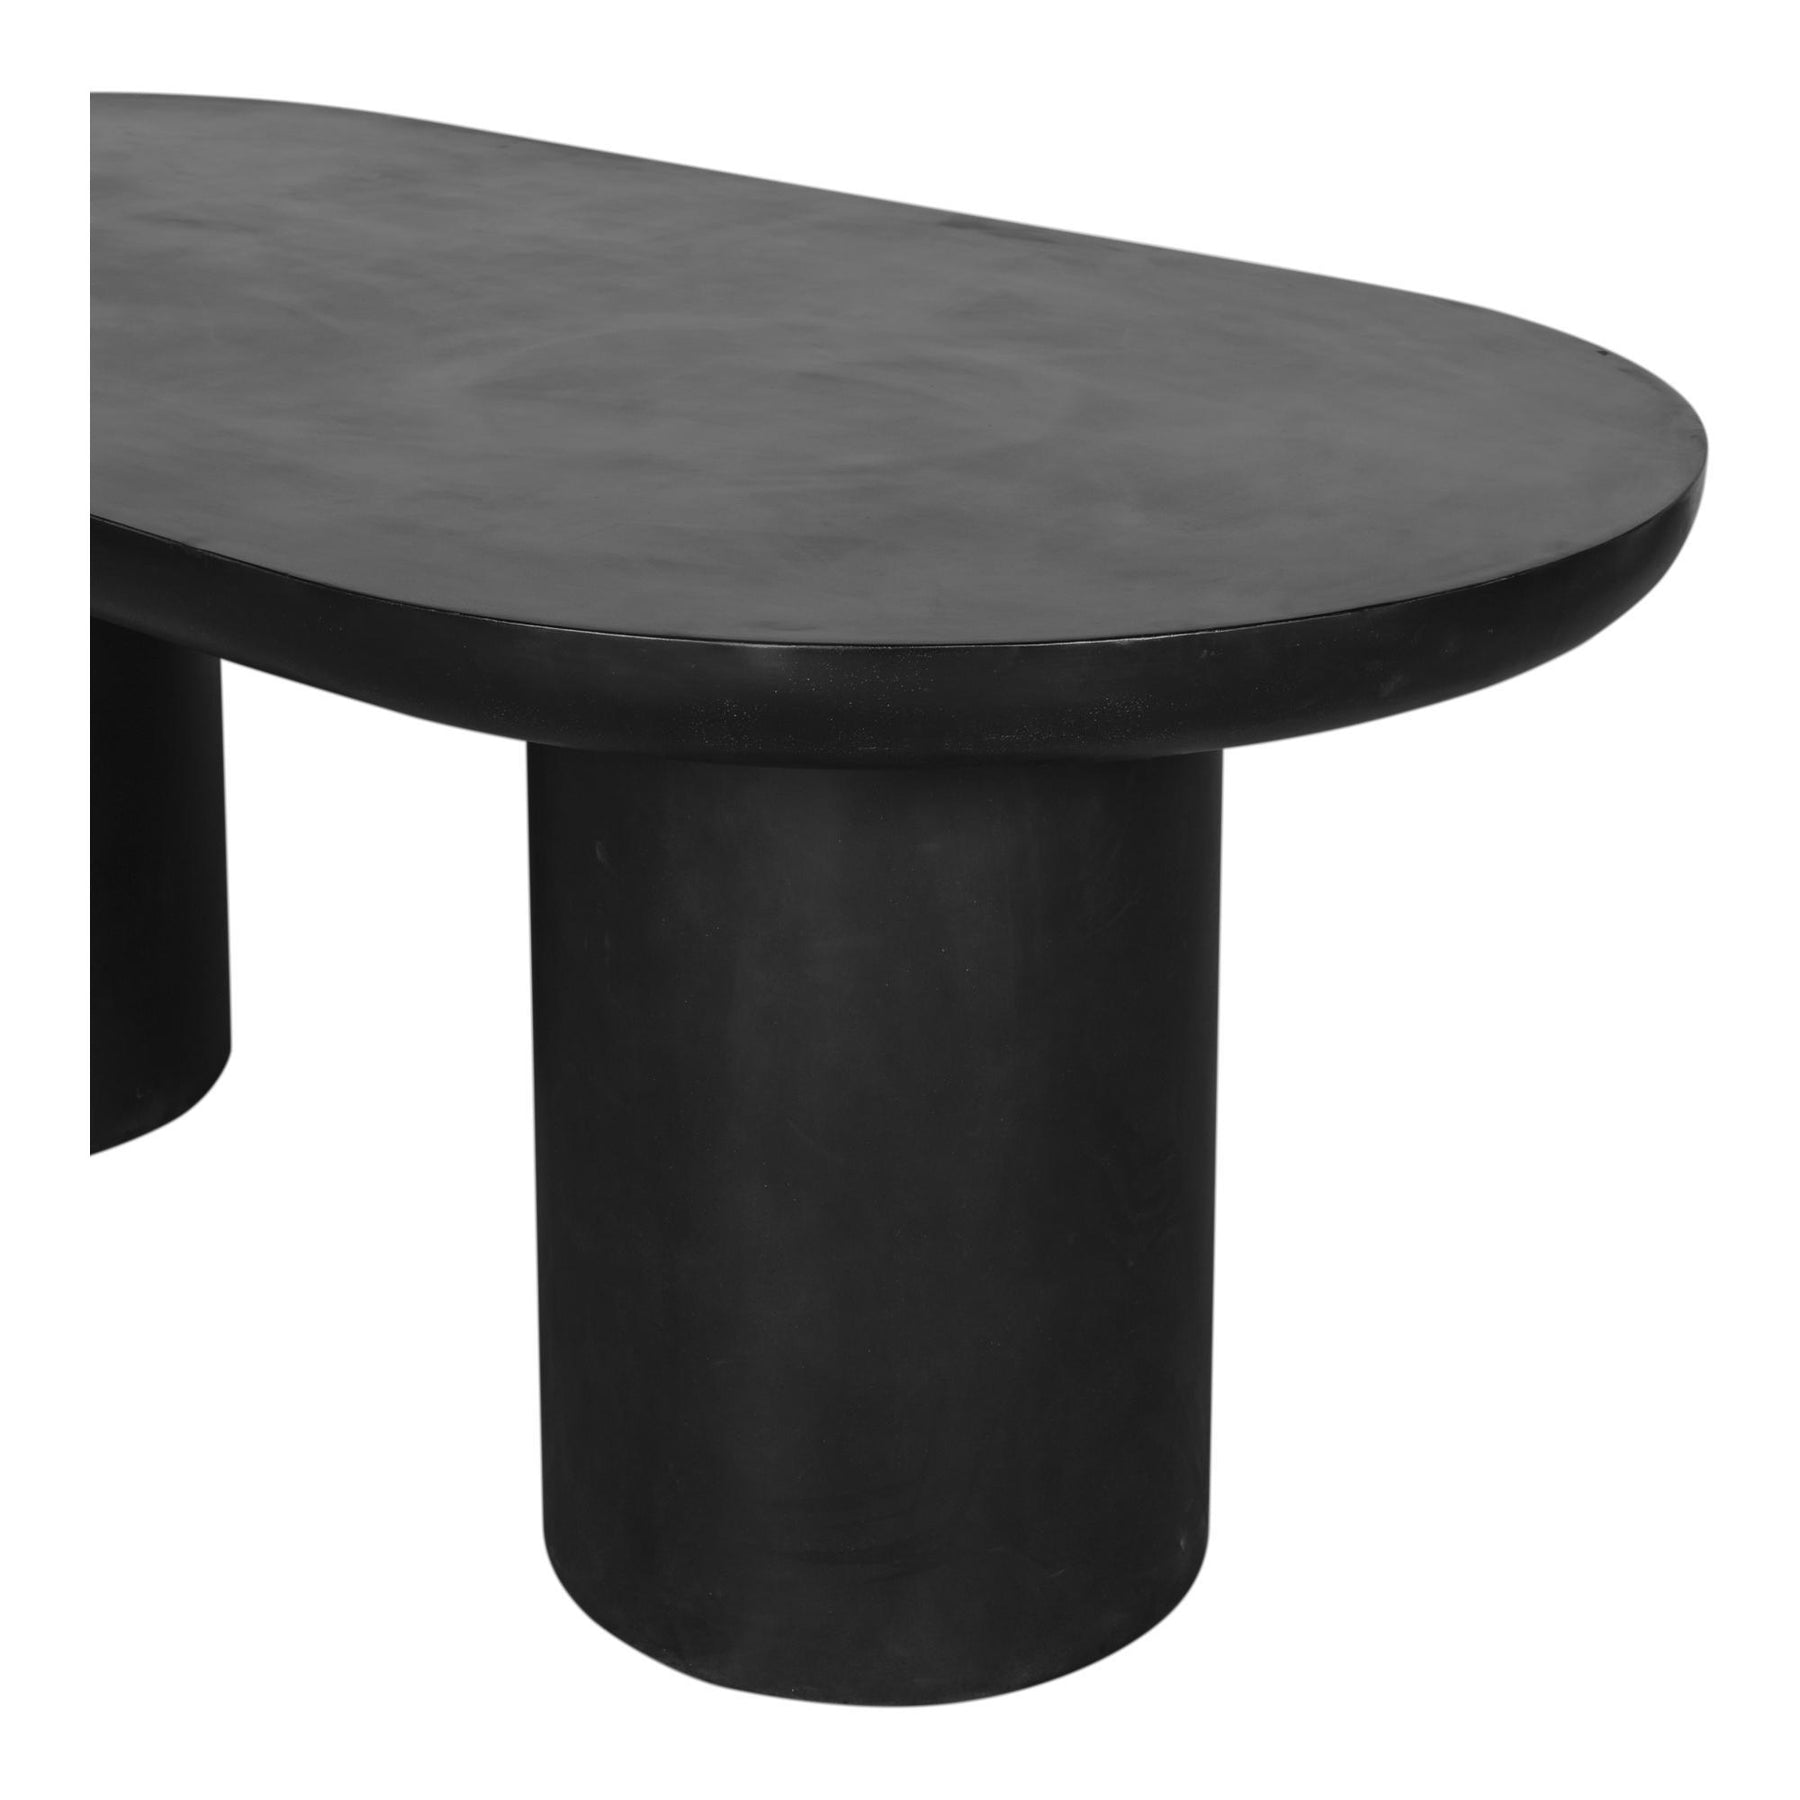 Moe's Home Collection Rocca Dining Table - ZT-1033-02